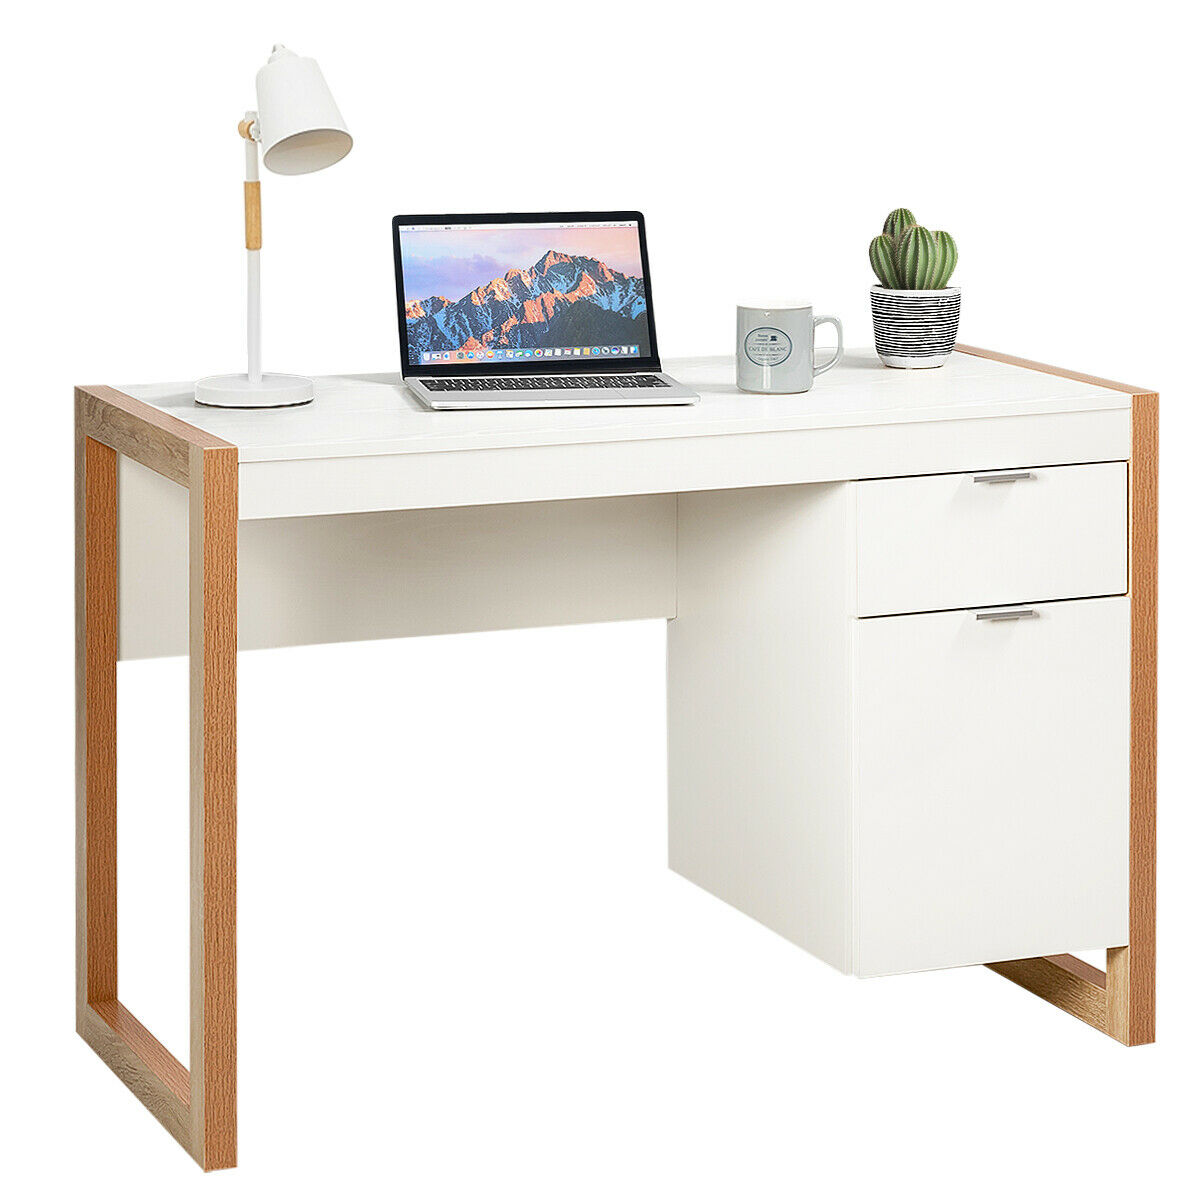 Wooden Computer Desk with Drawer and Cabinet for Home Office